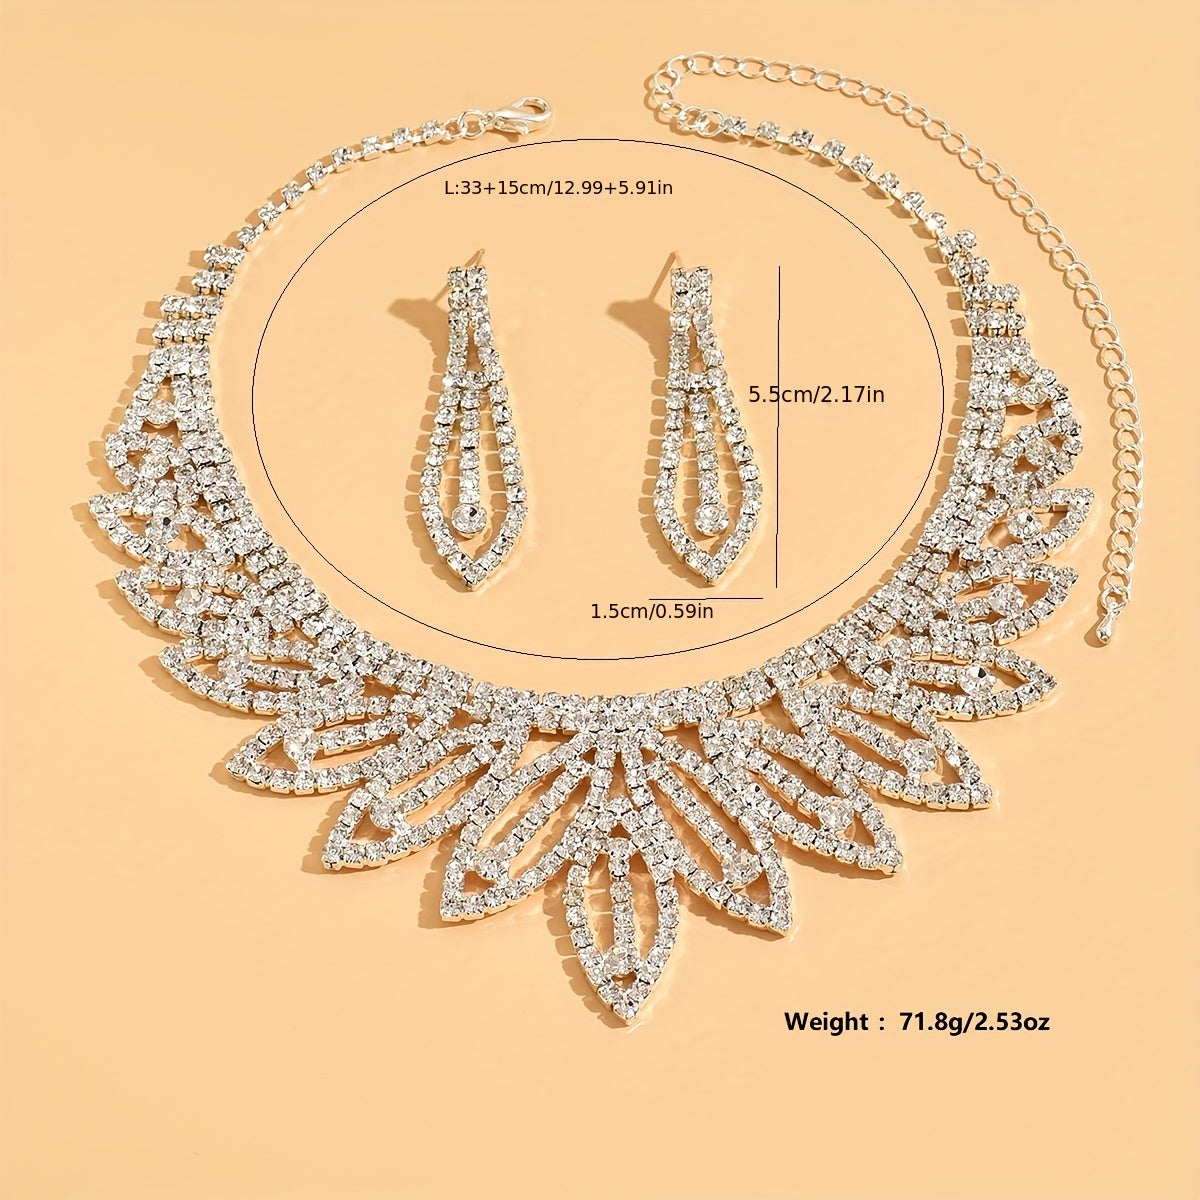 Sparkling Rhinestone Necklace and Earrings Set for Women - Perfect for Weddings and Special Occasions, Silver Plated Jewelry